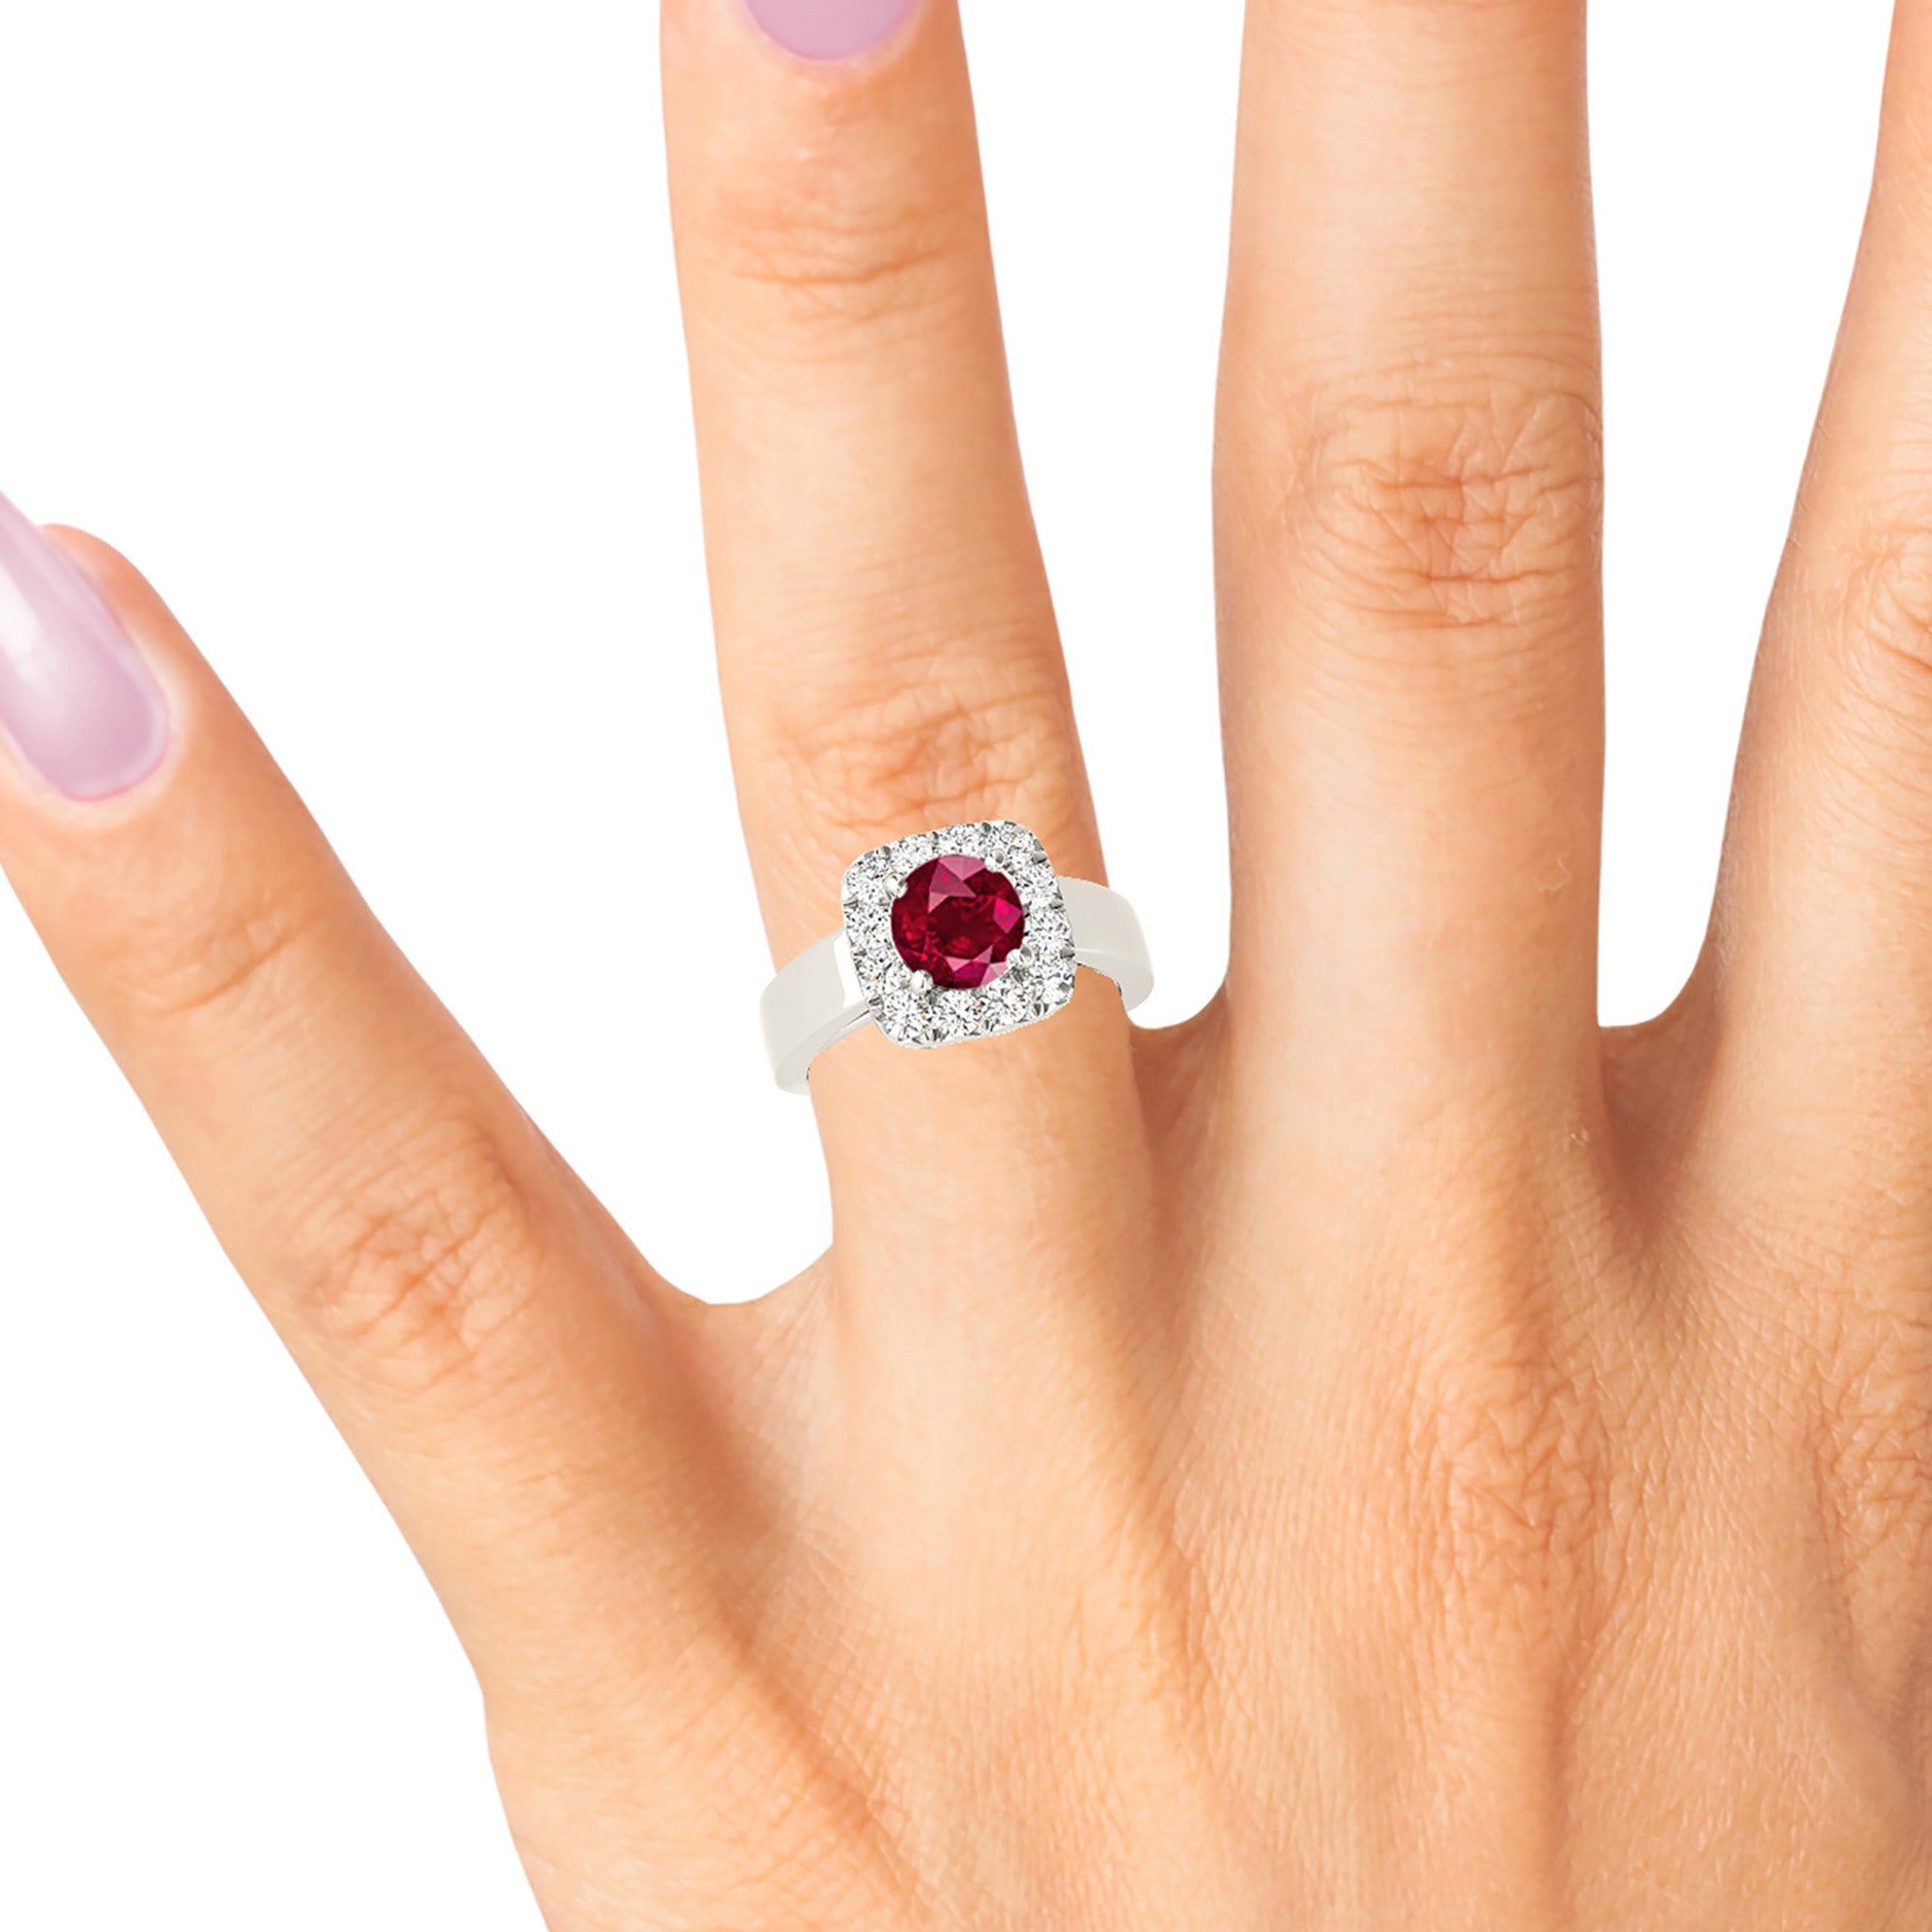 2.35 ct. Genuine Ruby Ring With 0.50 ctw. Diamond Cushion Halo and Solid Gold Solitaire Band-in 14K/18K White, Yellow, Rose Gold and Platinum - Christmas Jewelry Gift -VIRABYANI